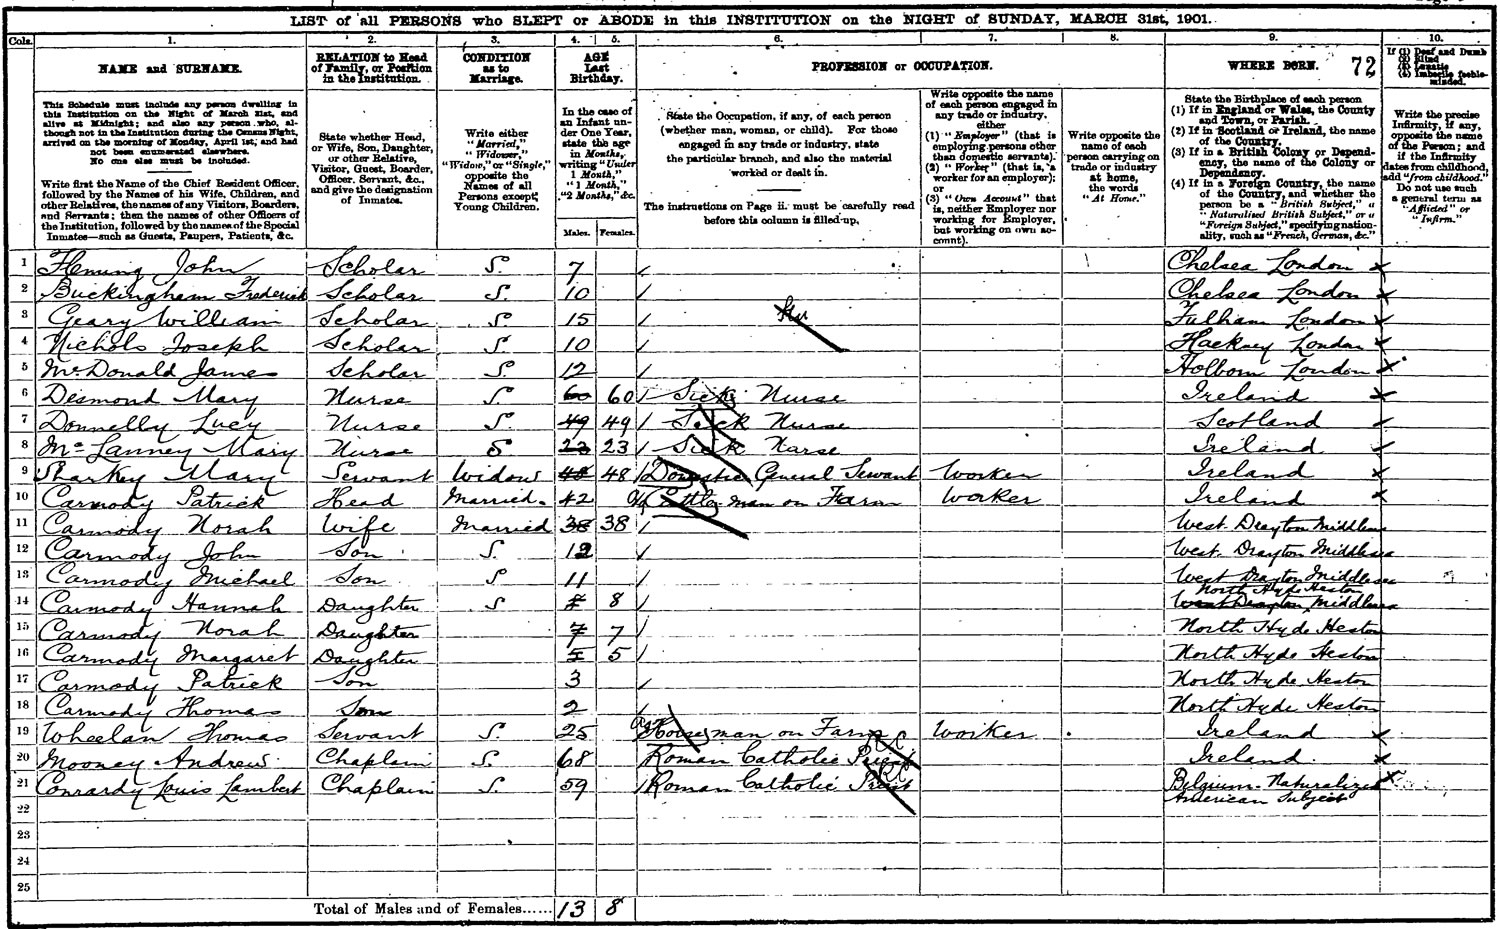 1901 census shows Frederick Buckingham in St Mary's Orphanage, North Hyde